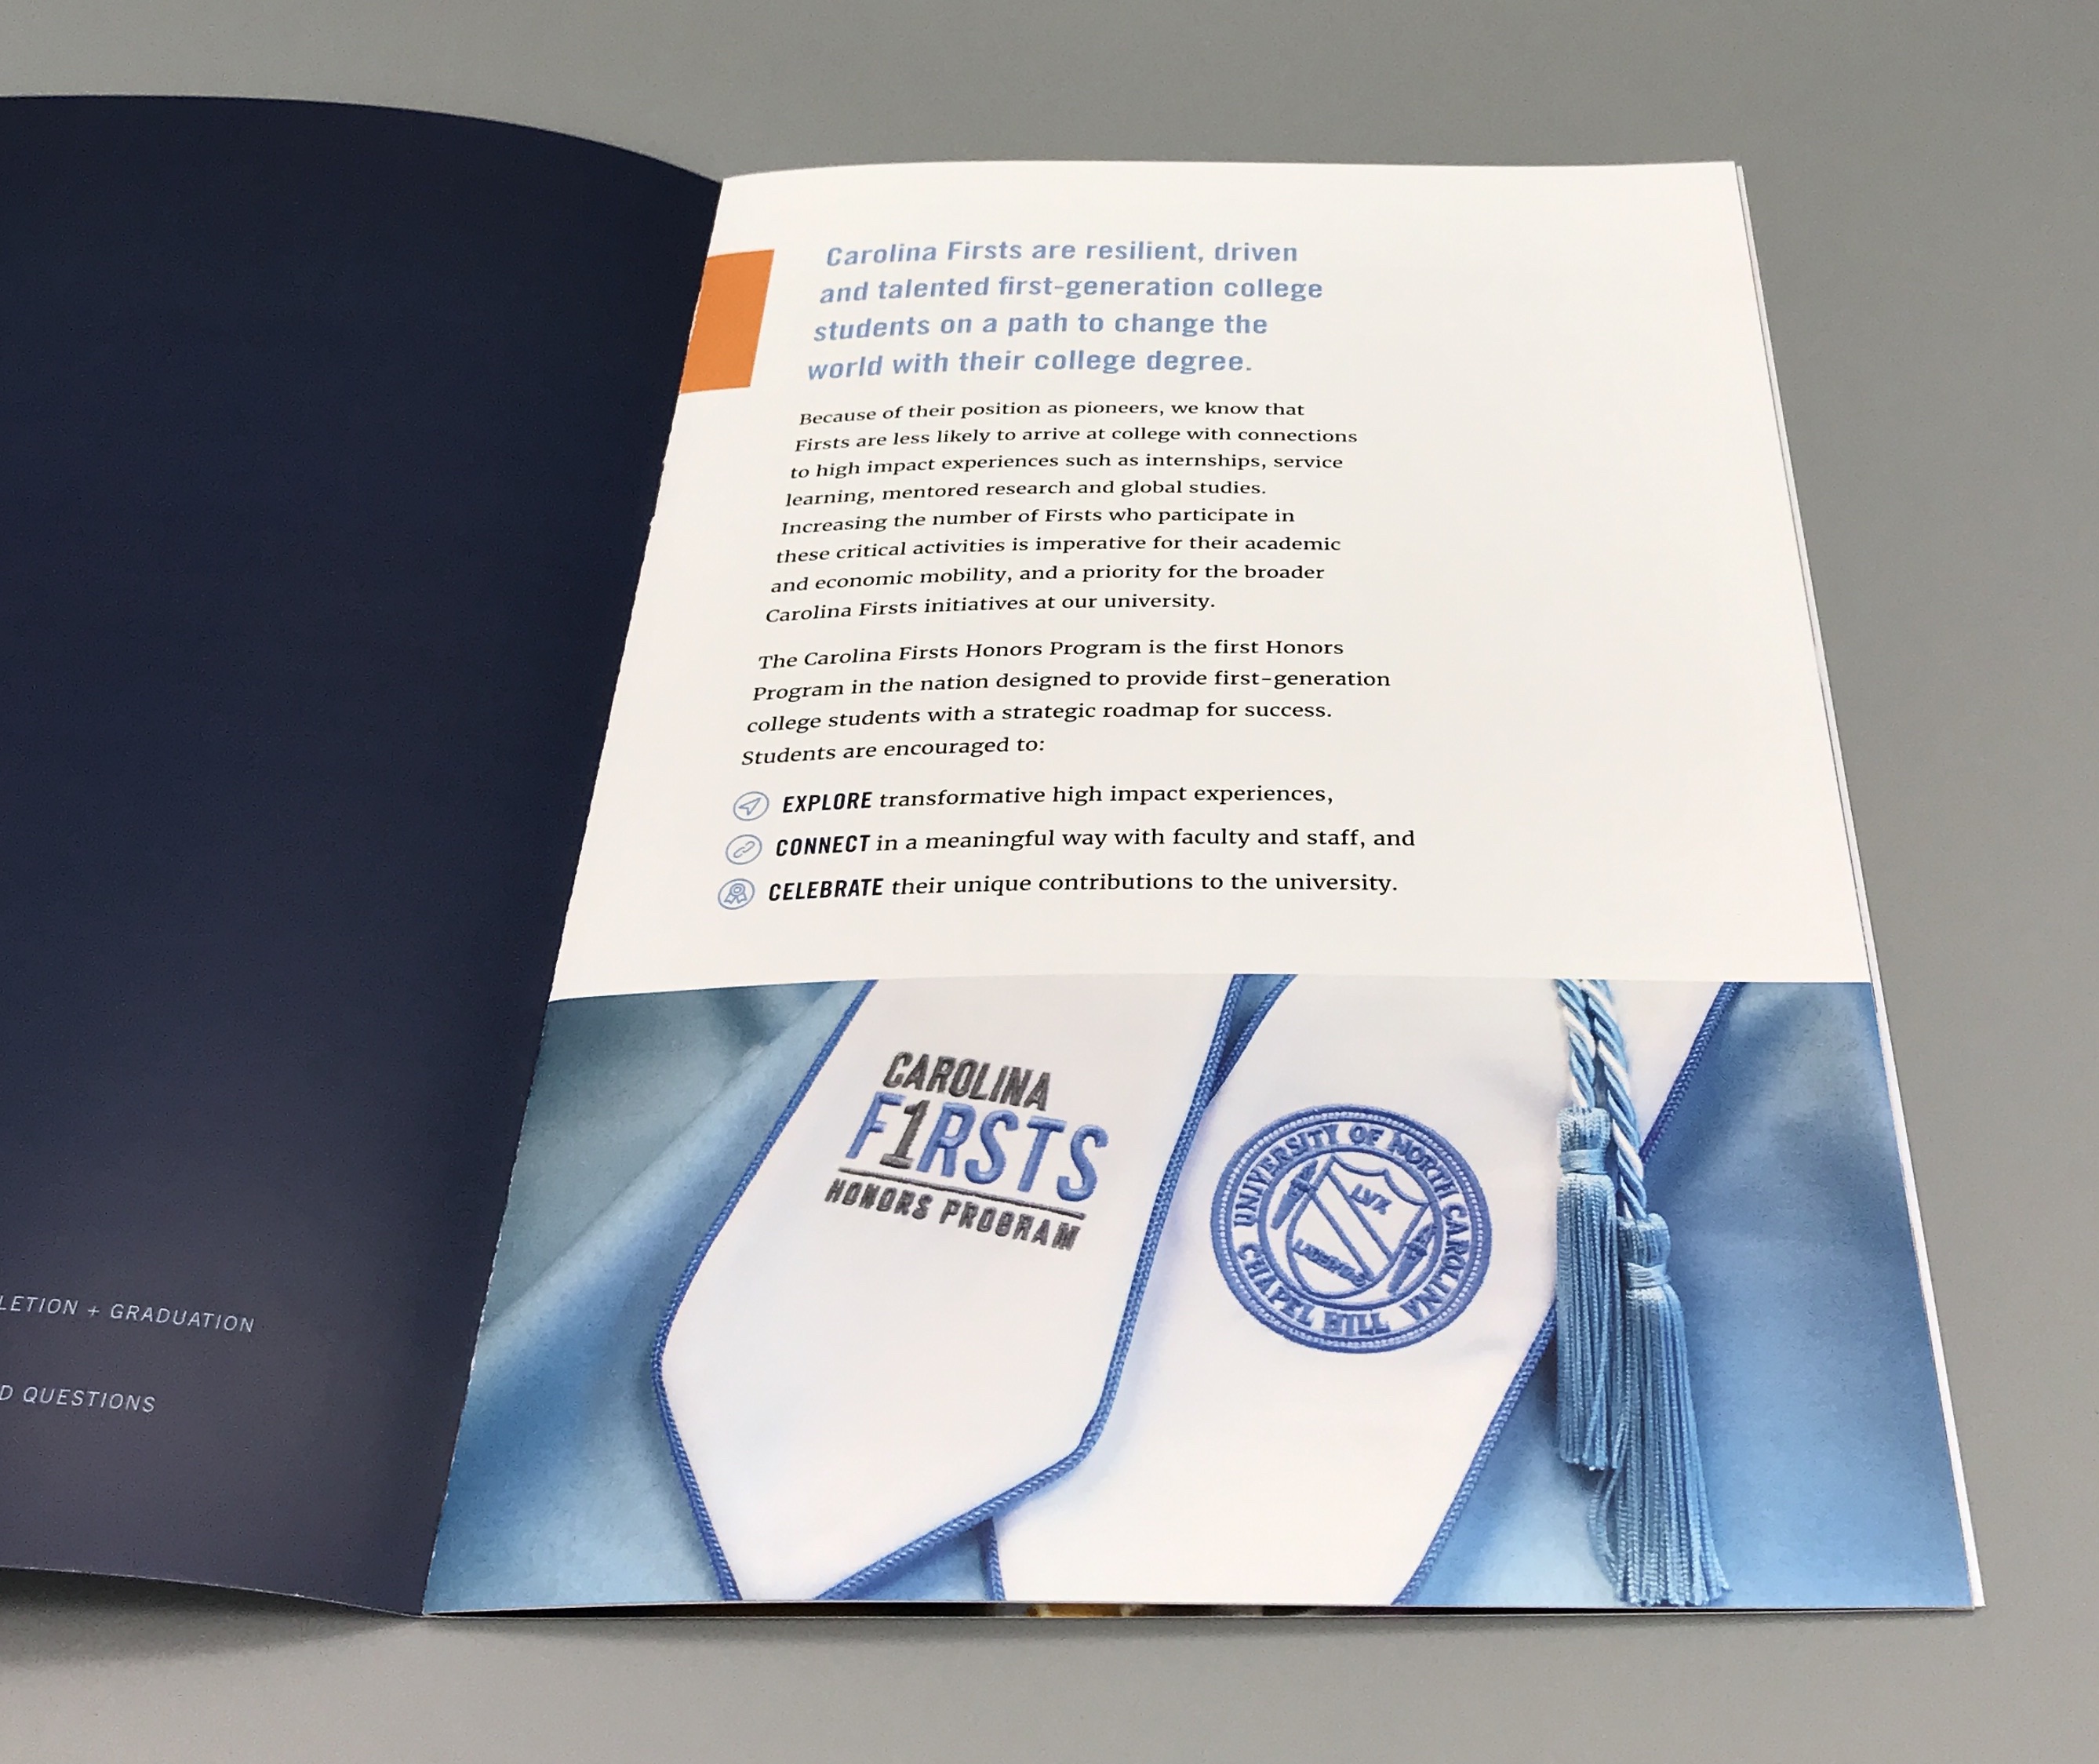 Photograph of an interior page of the Carolina Firsts booklet. It shows body copy and a photo of the graduation stole with the Carolina Firsts logo.